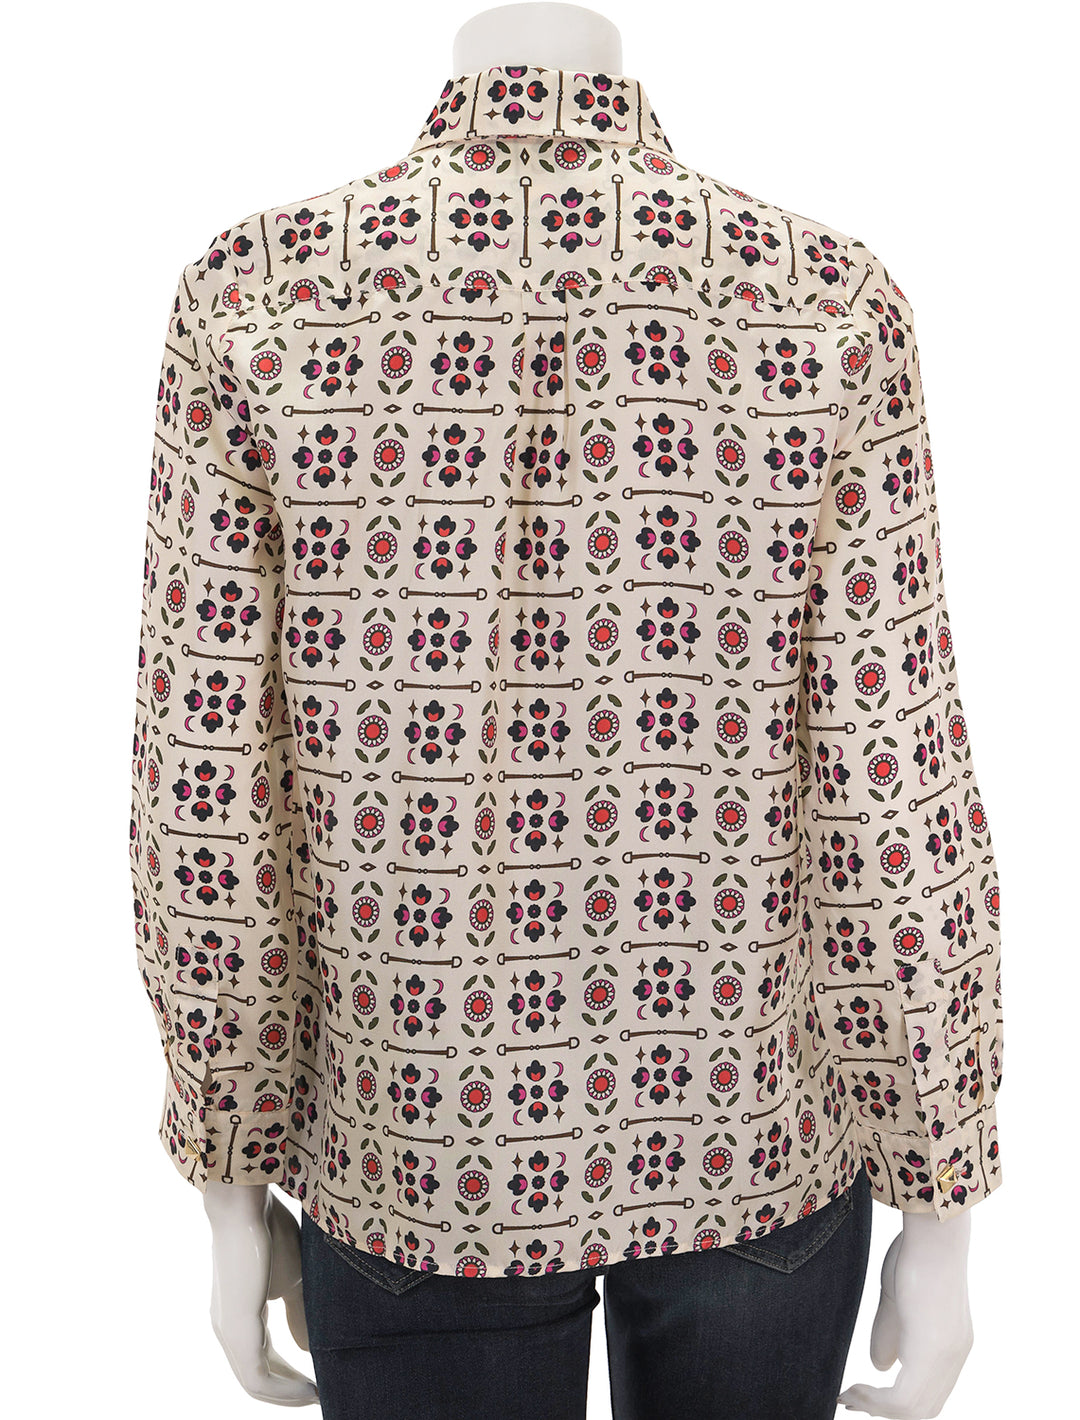 Back view of Vilagallo's camisa irina floral equestrian blouse.